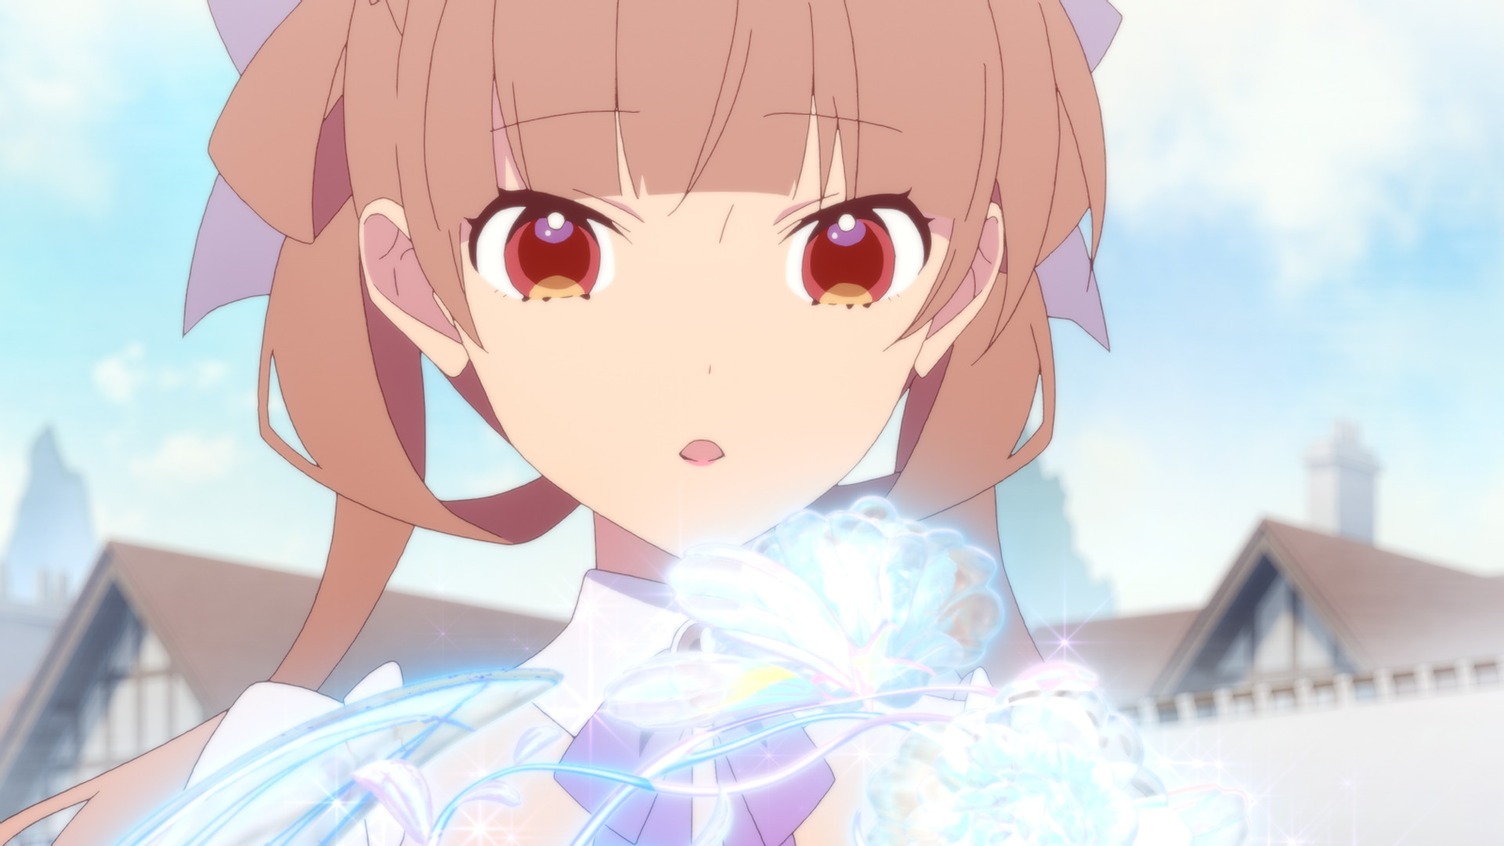 Sugar Apple Fairy Tale Anime Sums Up Anne’s Motivations in First Season 2 Character Trailer